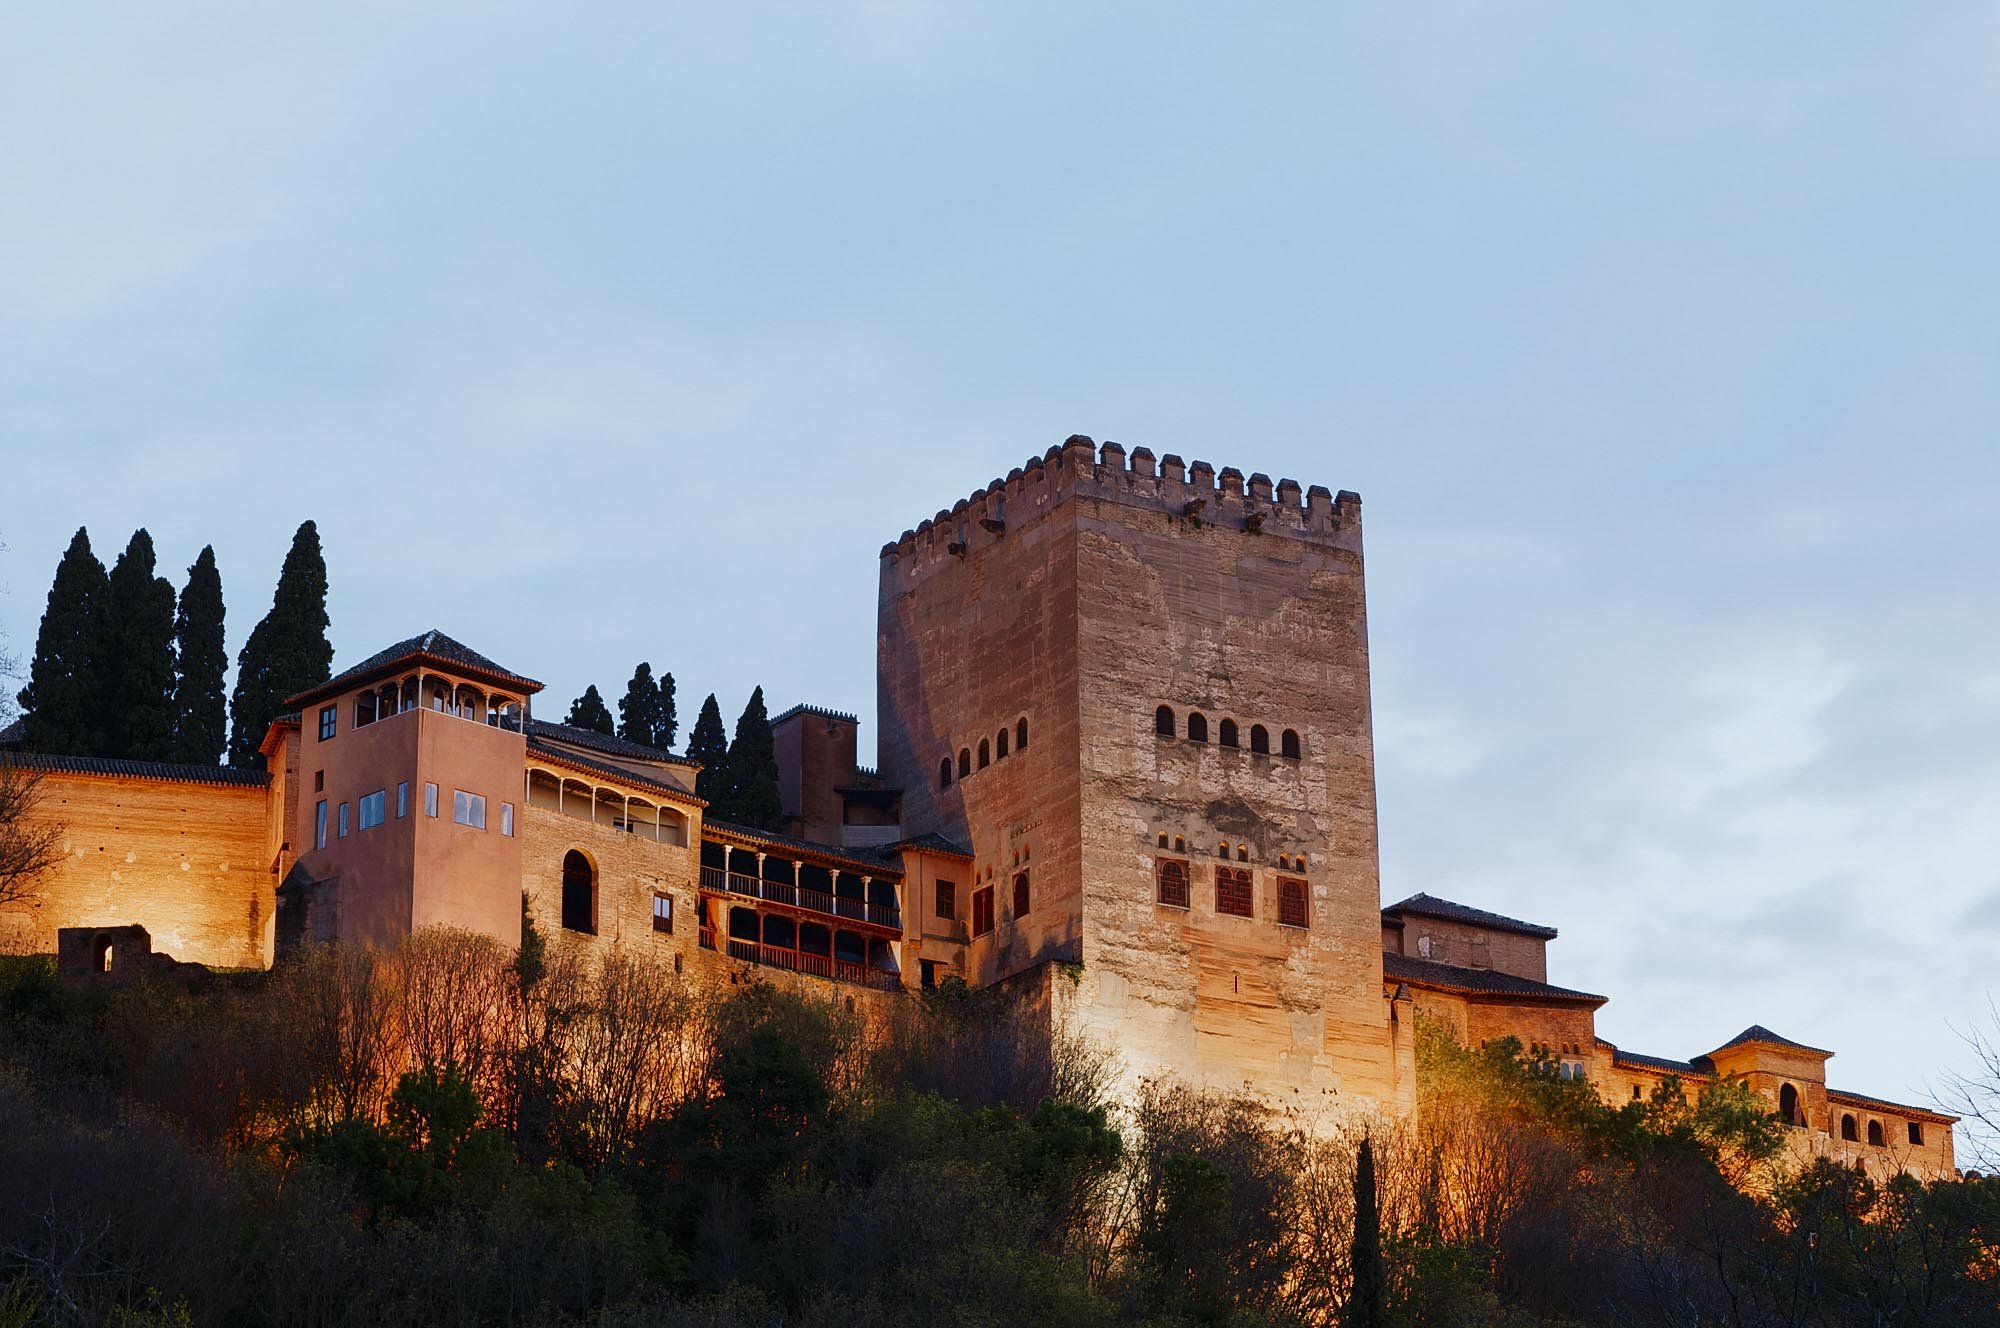 The exterior of the Alhambra by night